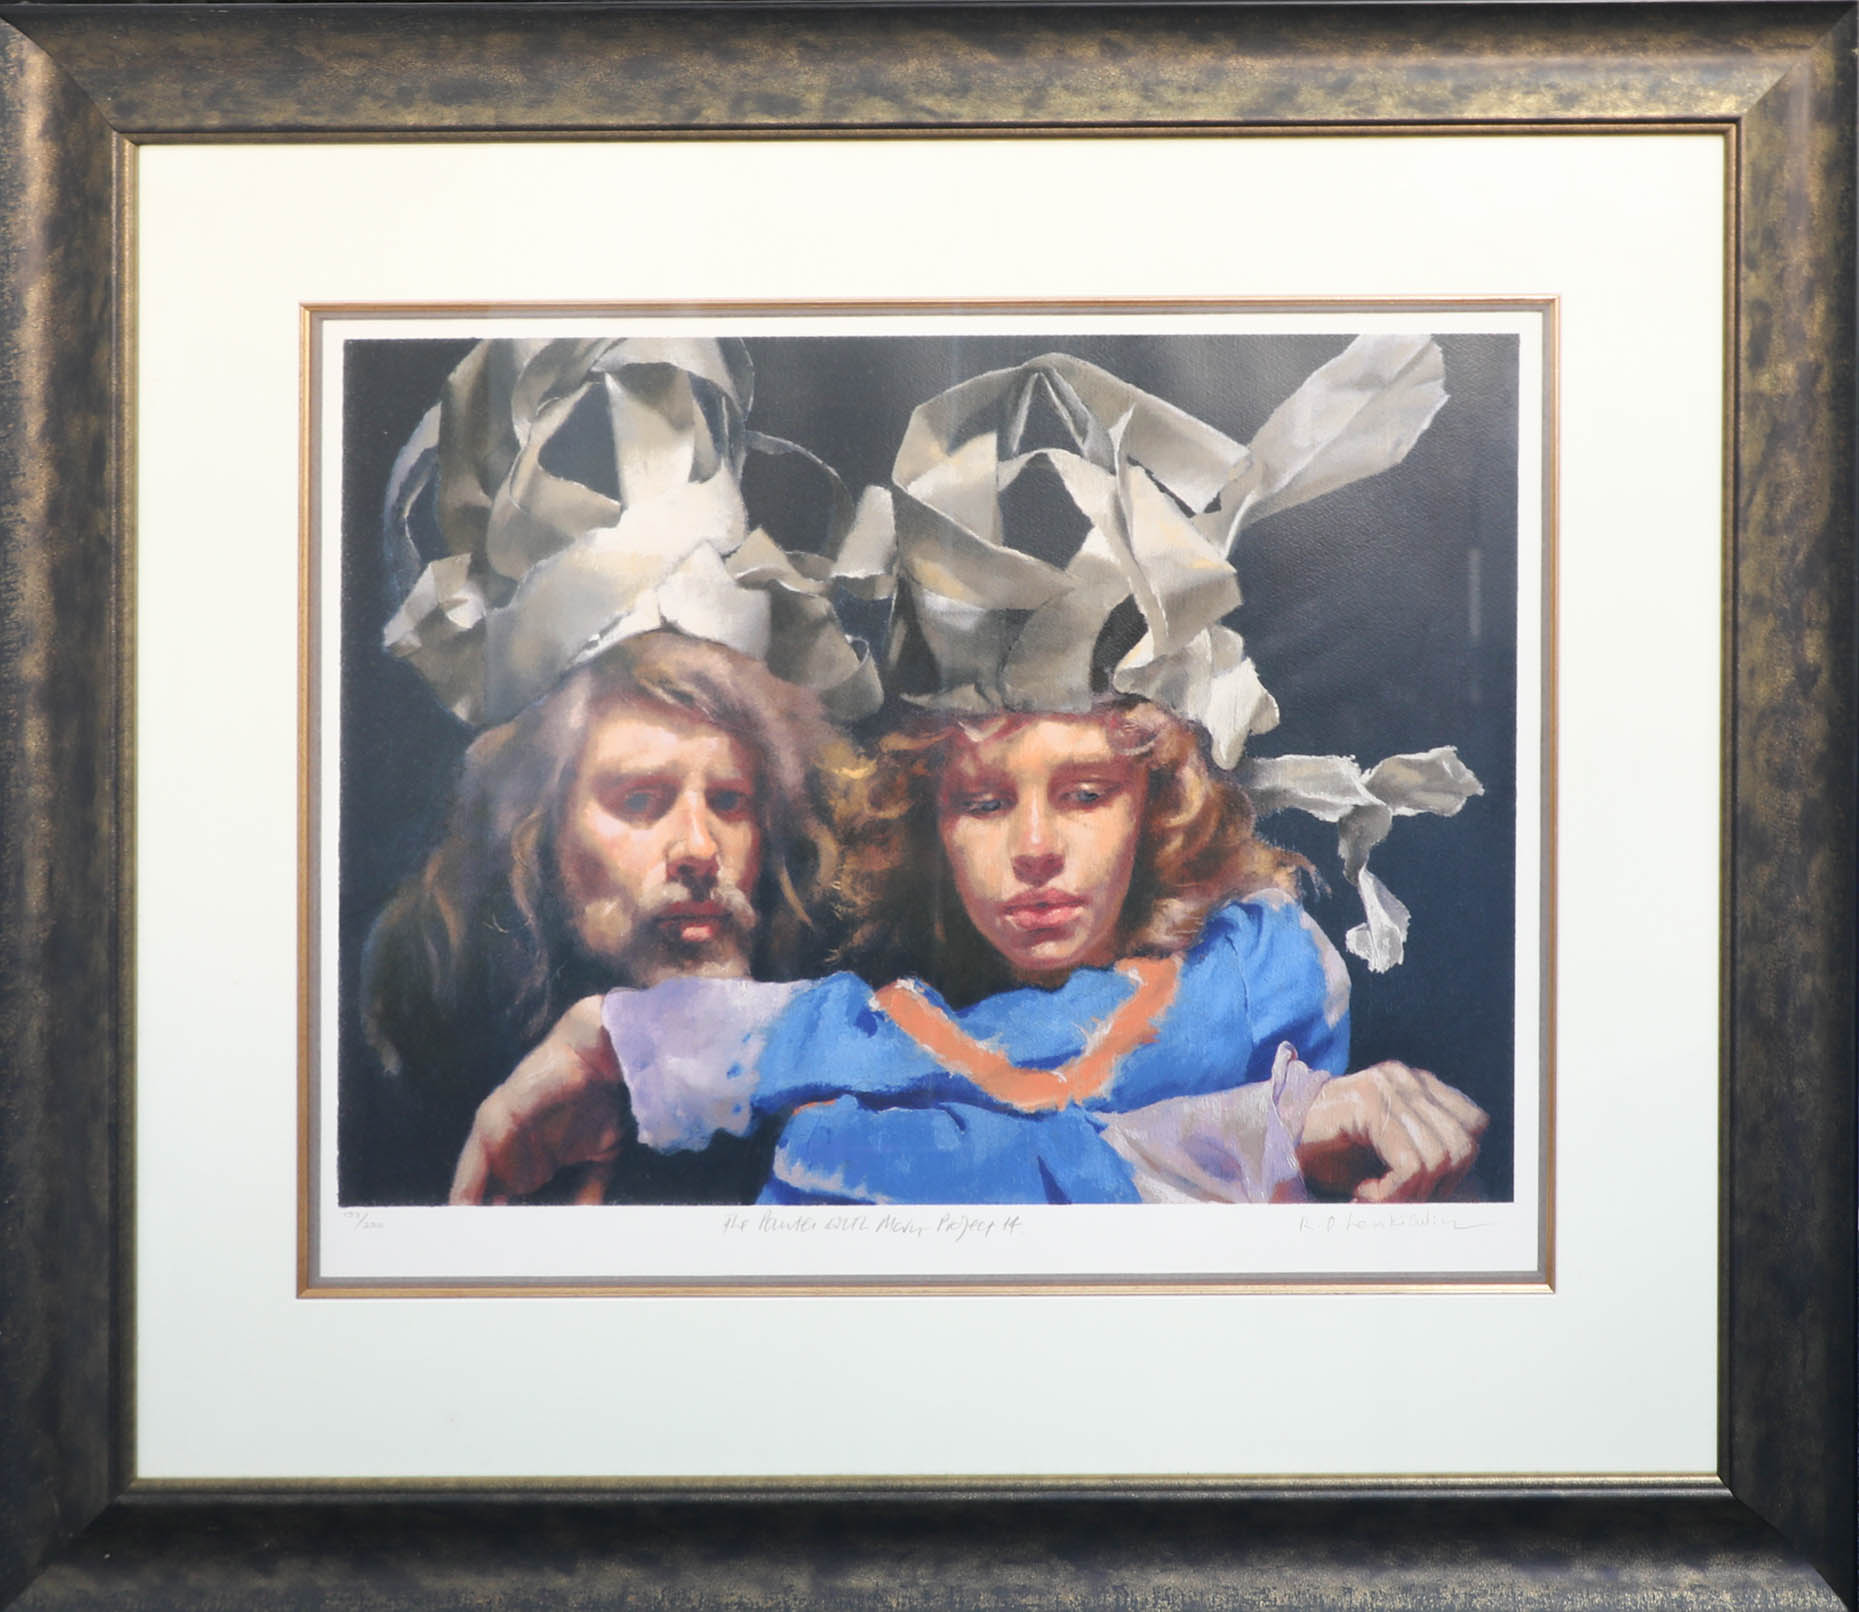 Robert Lenkiewicz 'The Painter with Mary, Project 14', signed print no. 157/250, framed and